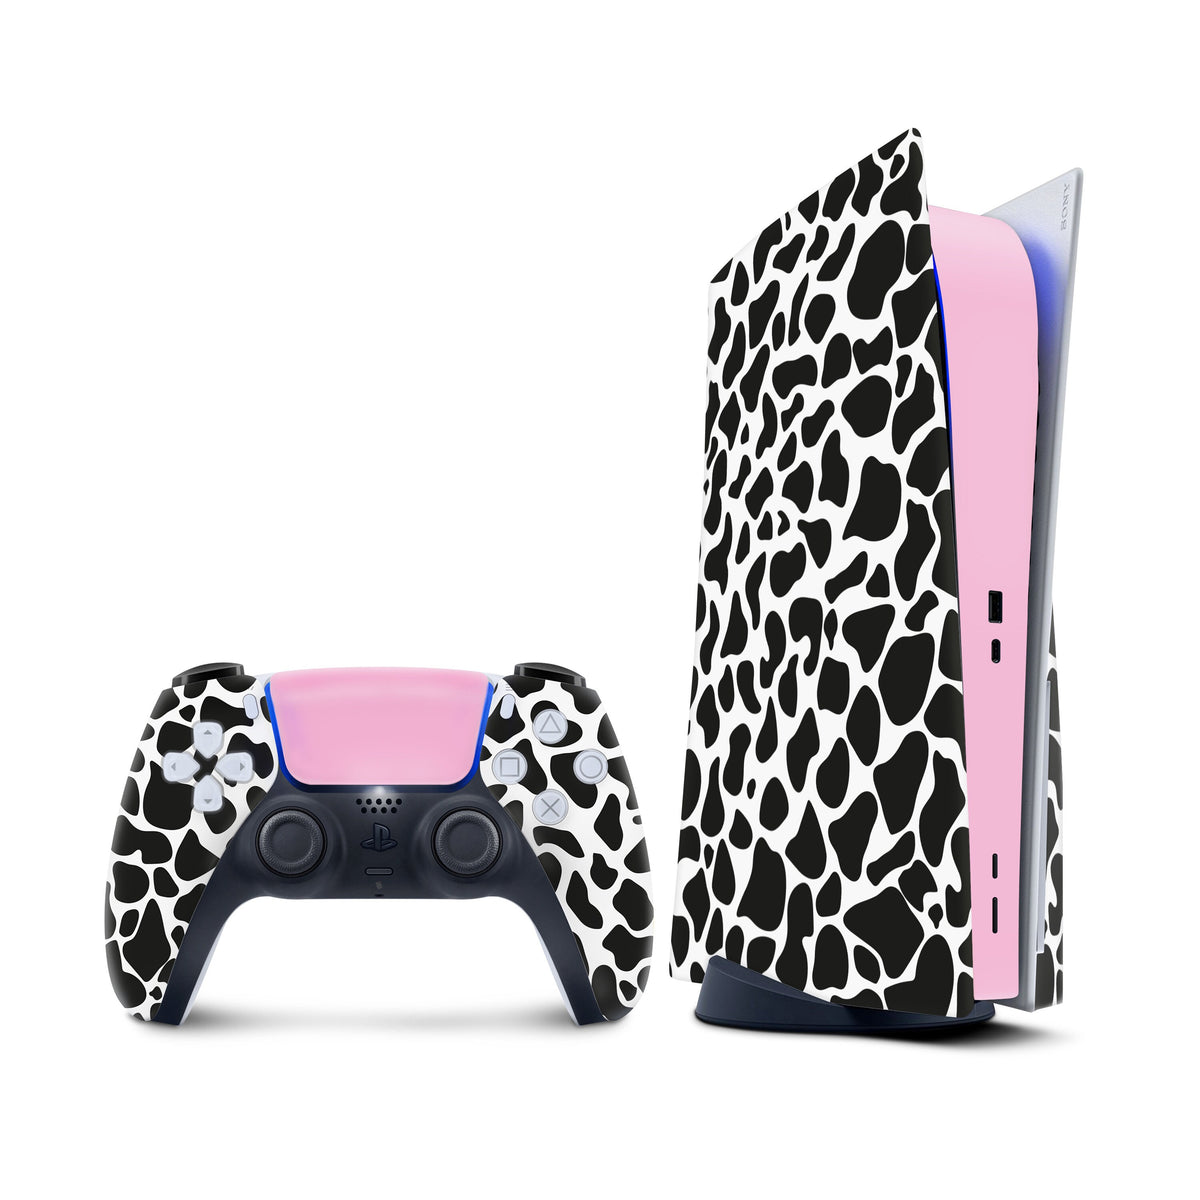 Ps5 skin Dalmatian, Sony Playstation 5 controller skin Leopard, Vinyl 3m stickers Full wrap cover